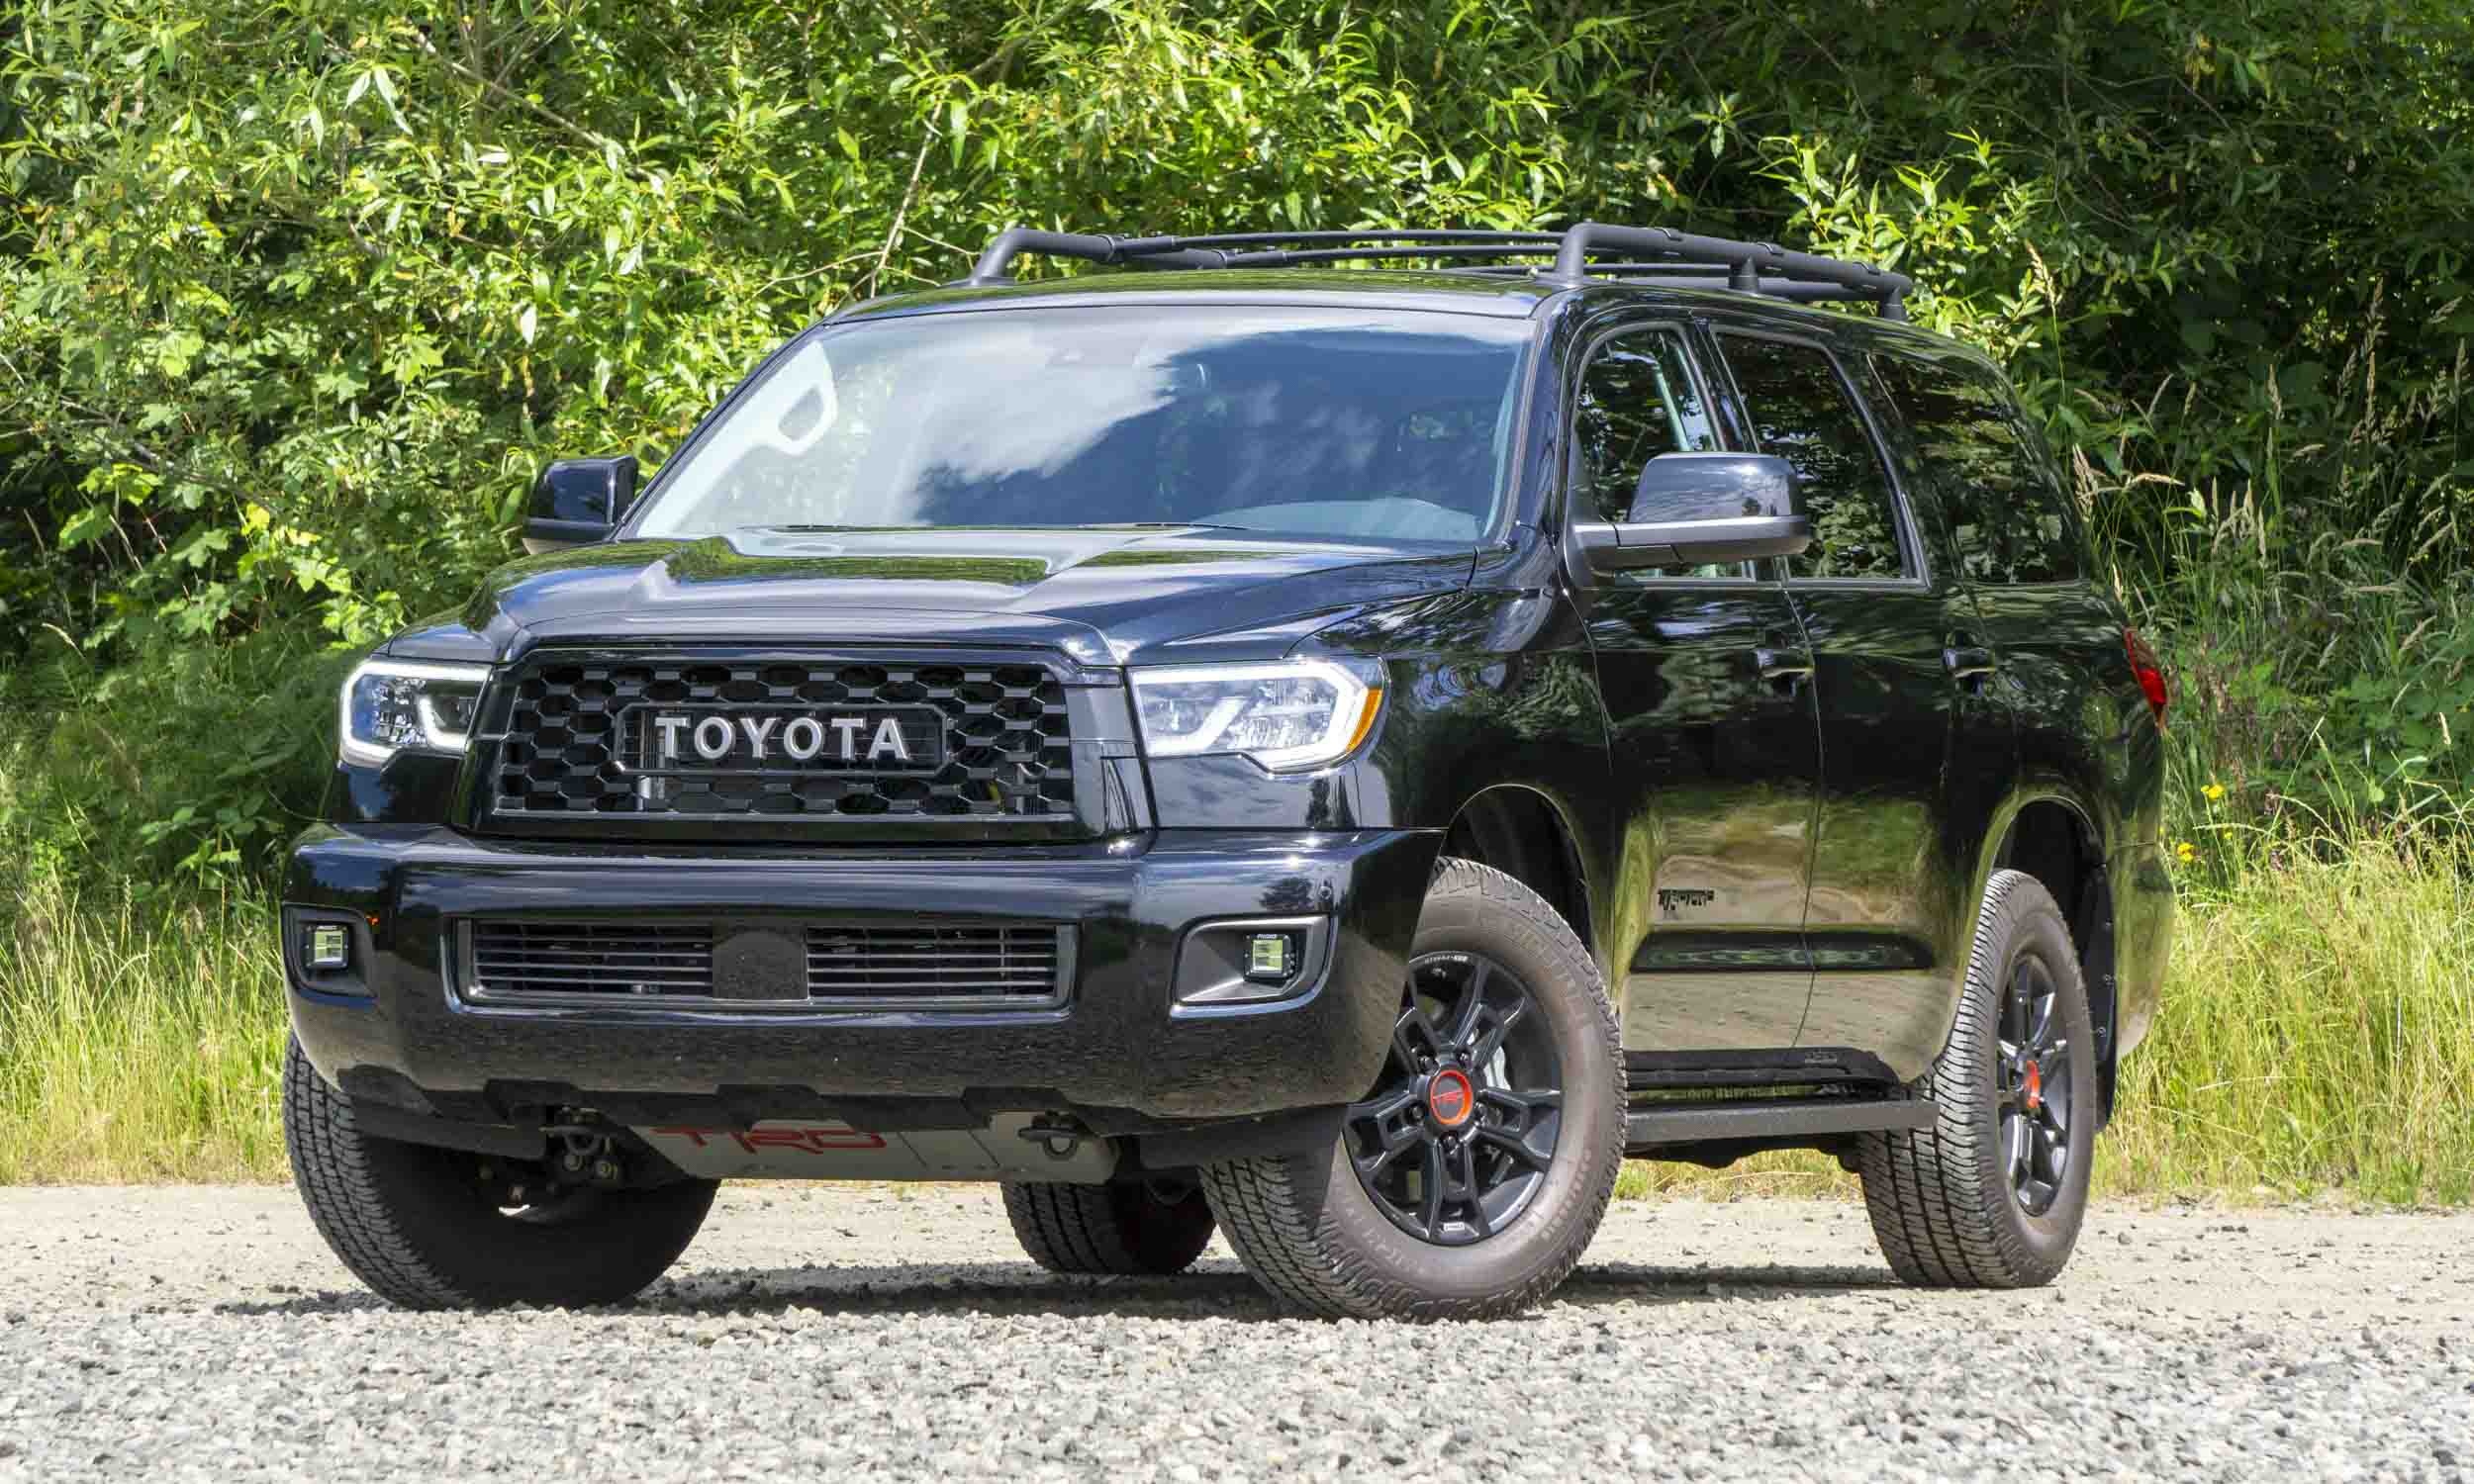 Toyota Sequoia, TRD Pro edition, Off-road capabilities, Expert review, 2500x1500 HD Desktop